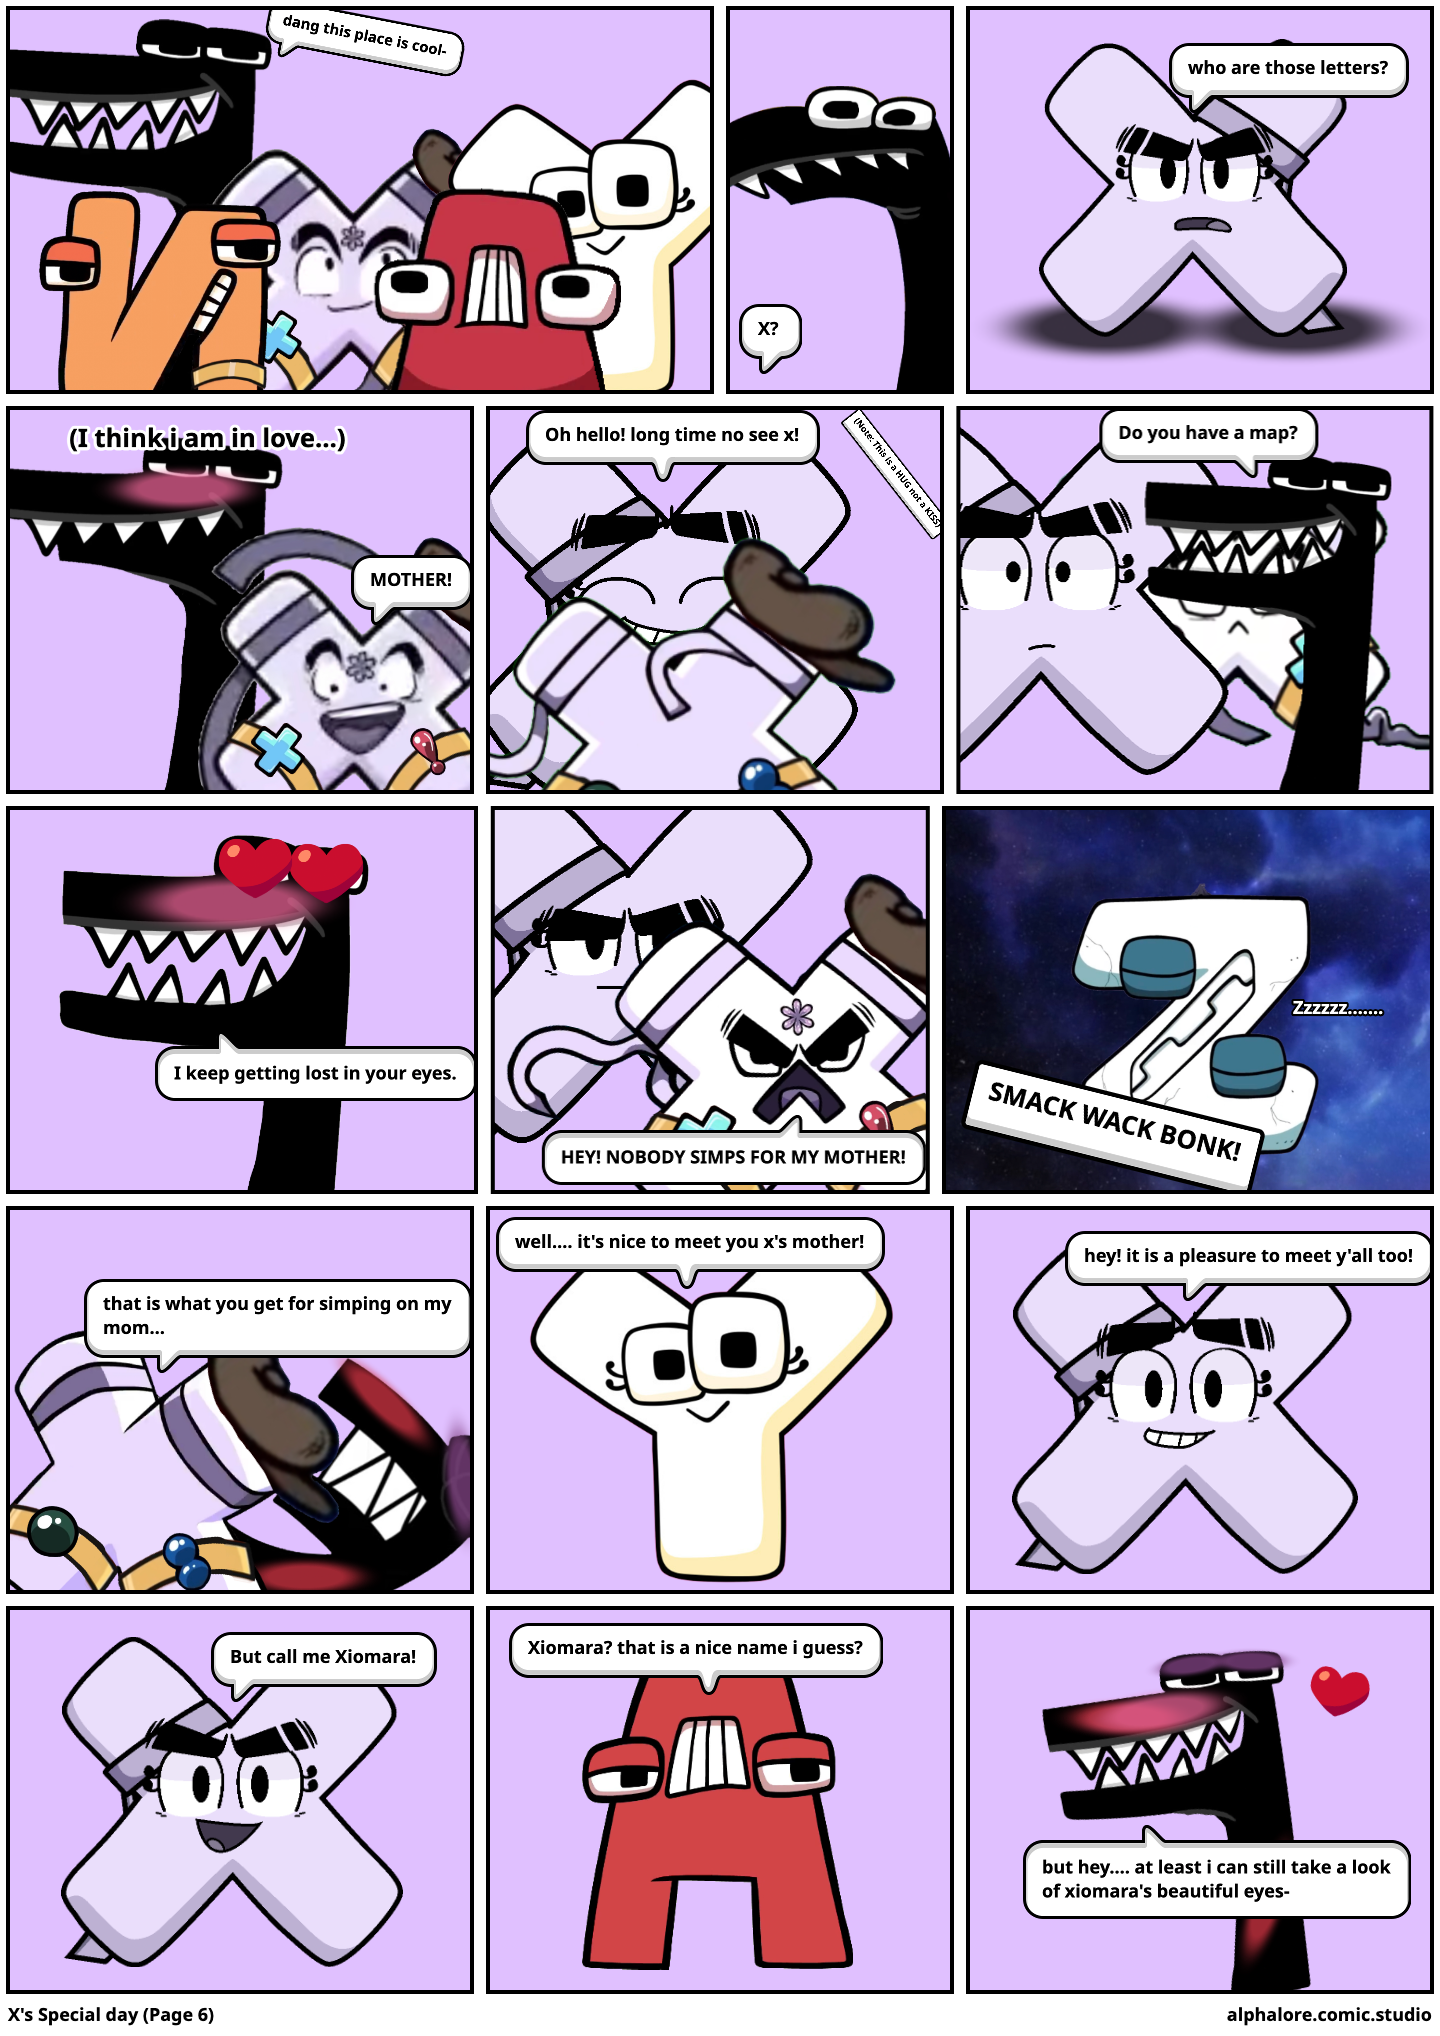 X's Special day (Page 6)